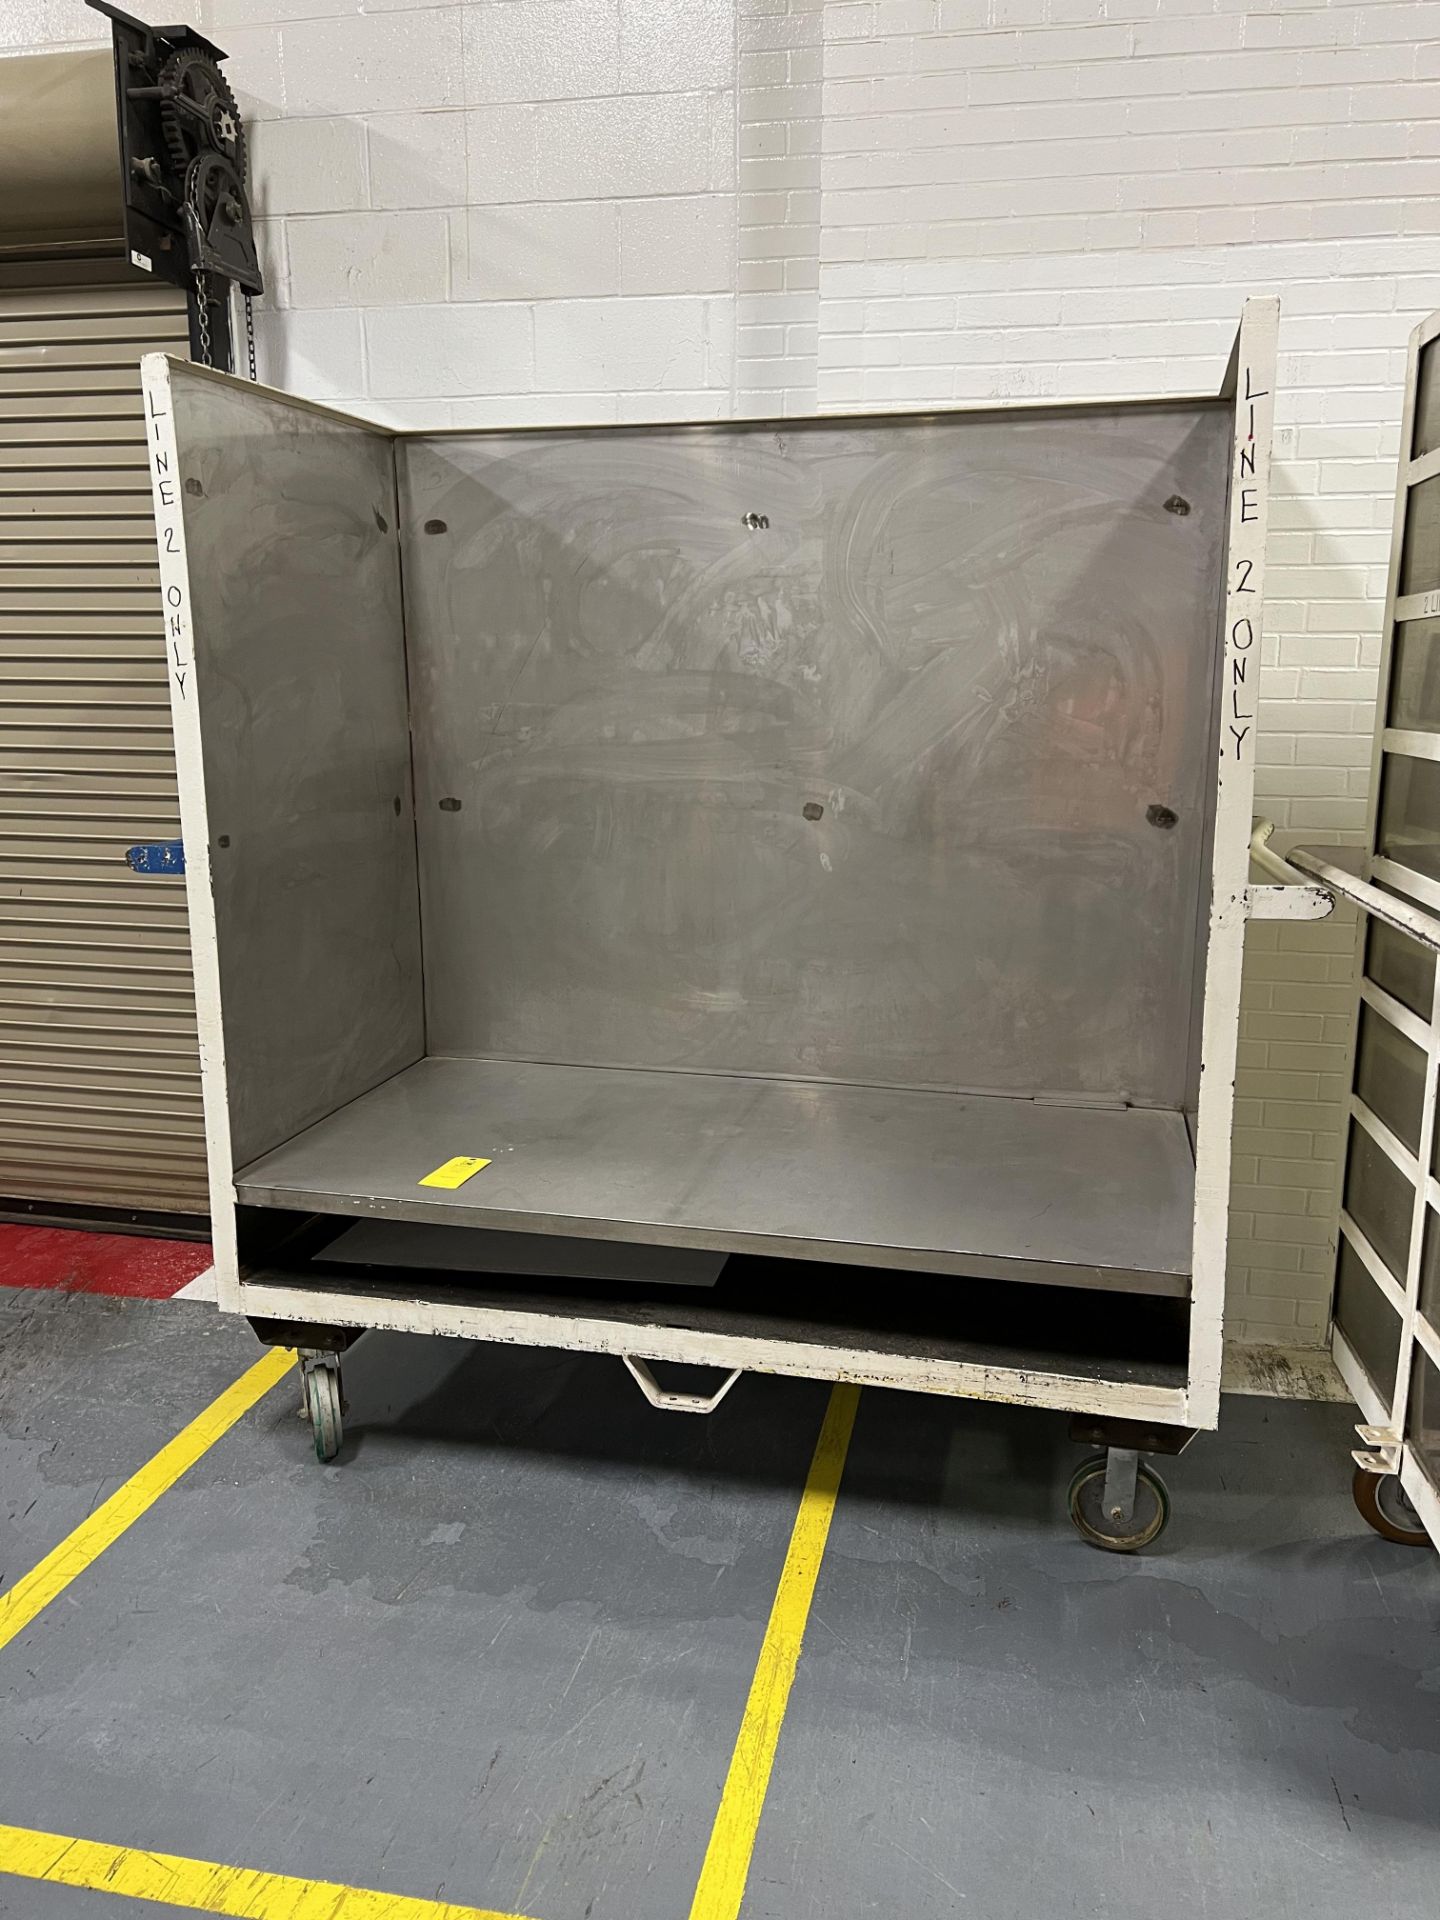 Product Cart, Removal/Loading Fee $50